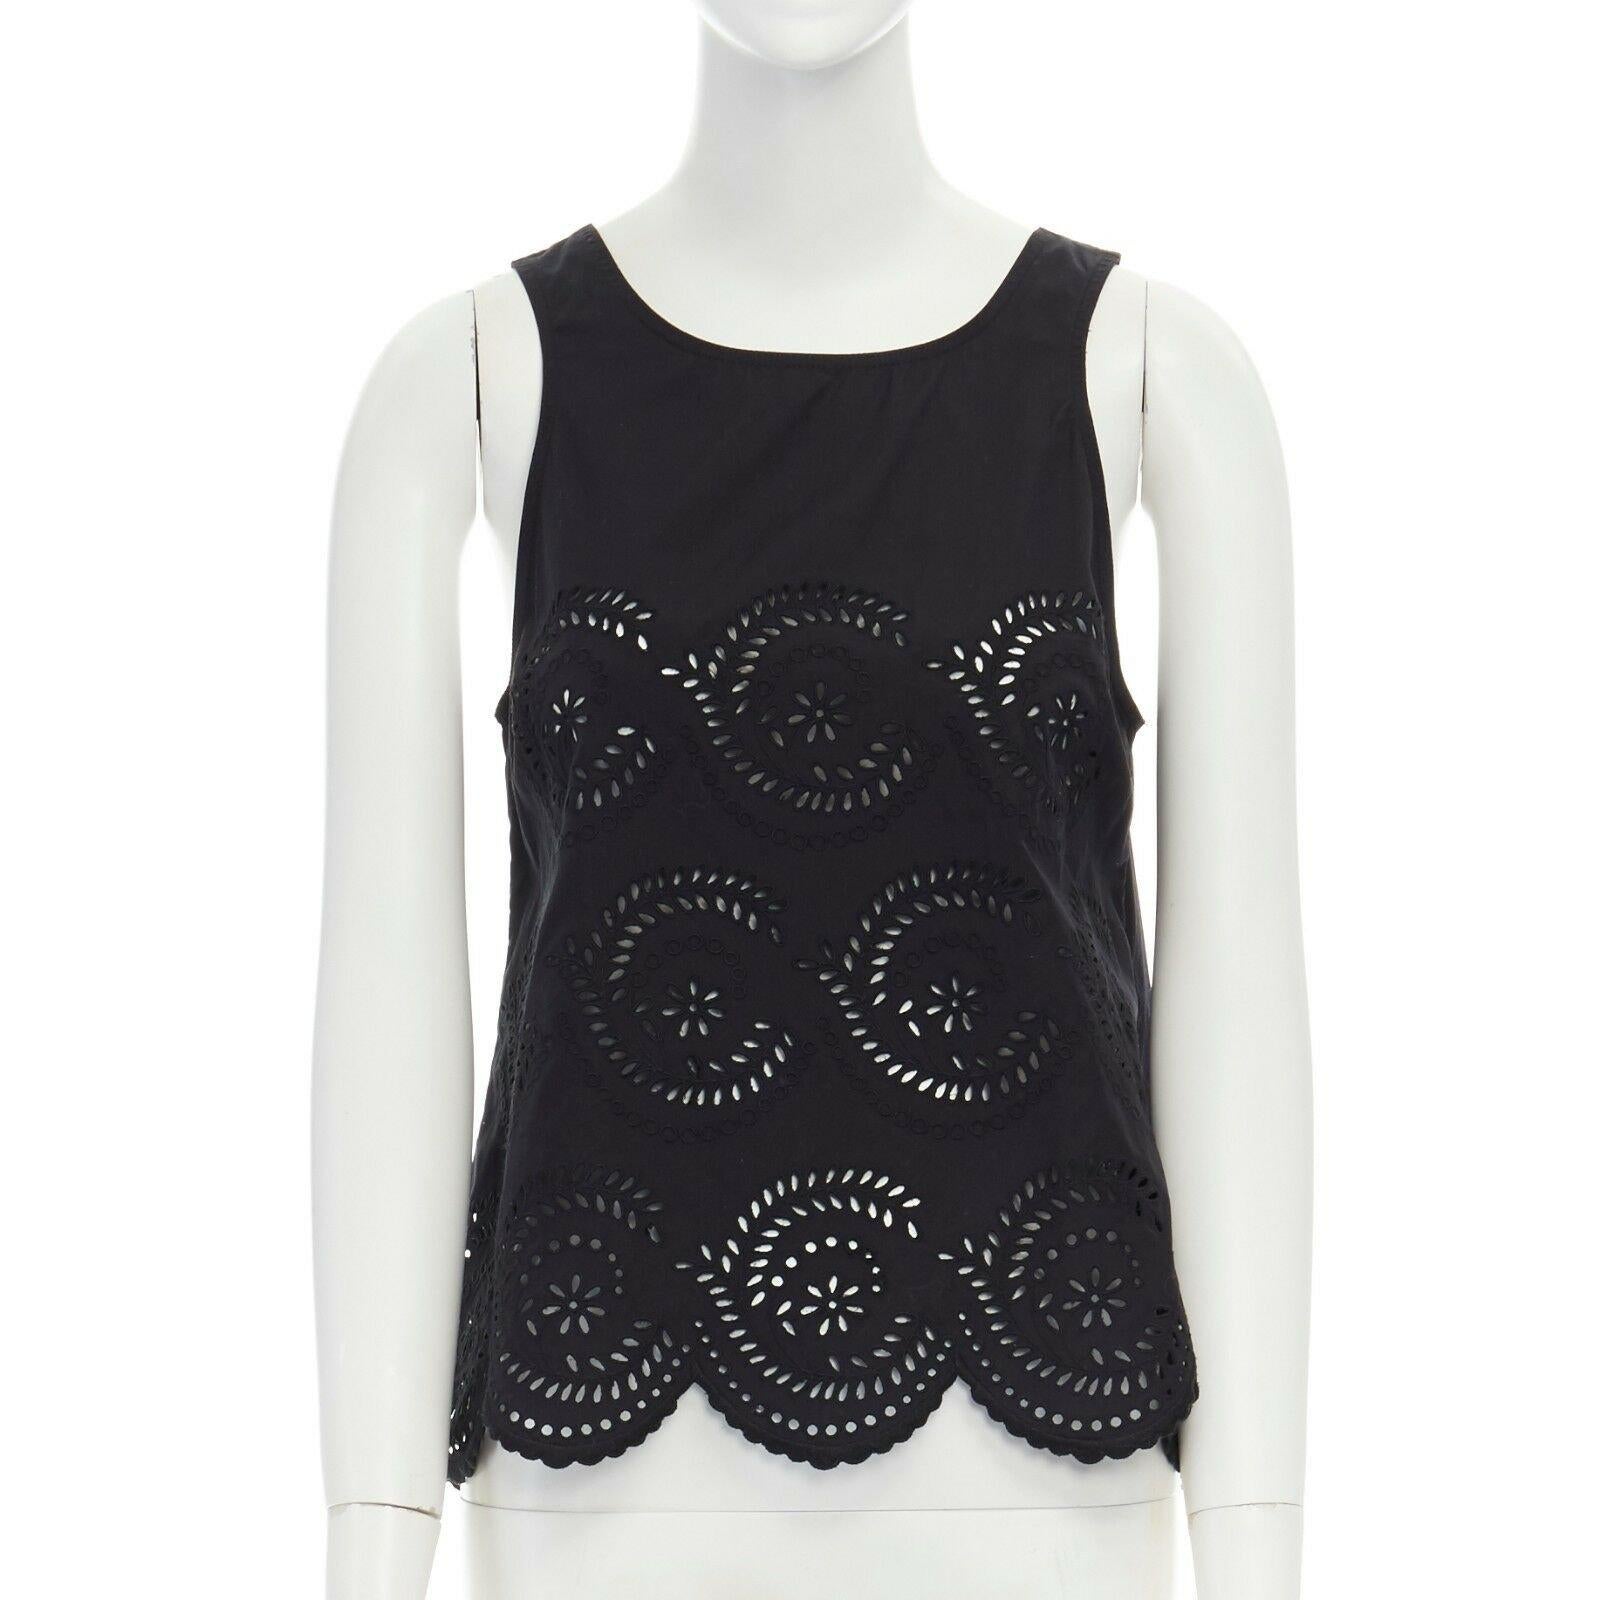 MARC BY MARC JACOBS black cotton embroidery angais scalloped  sleeveless top XS
Brand: Marc by Marc Jacobs
Designer: Marc Jacobs
Model Name / Style: Cotton vest
Material: Cotton
Color: Black
Pattern: Solid
Closure: Button
Extra Detail: Keyhole back